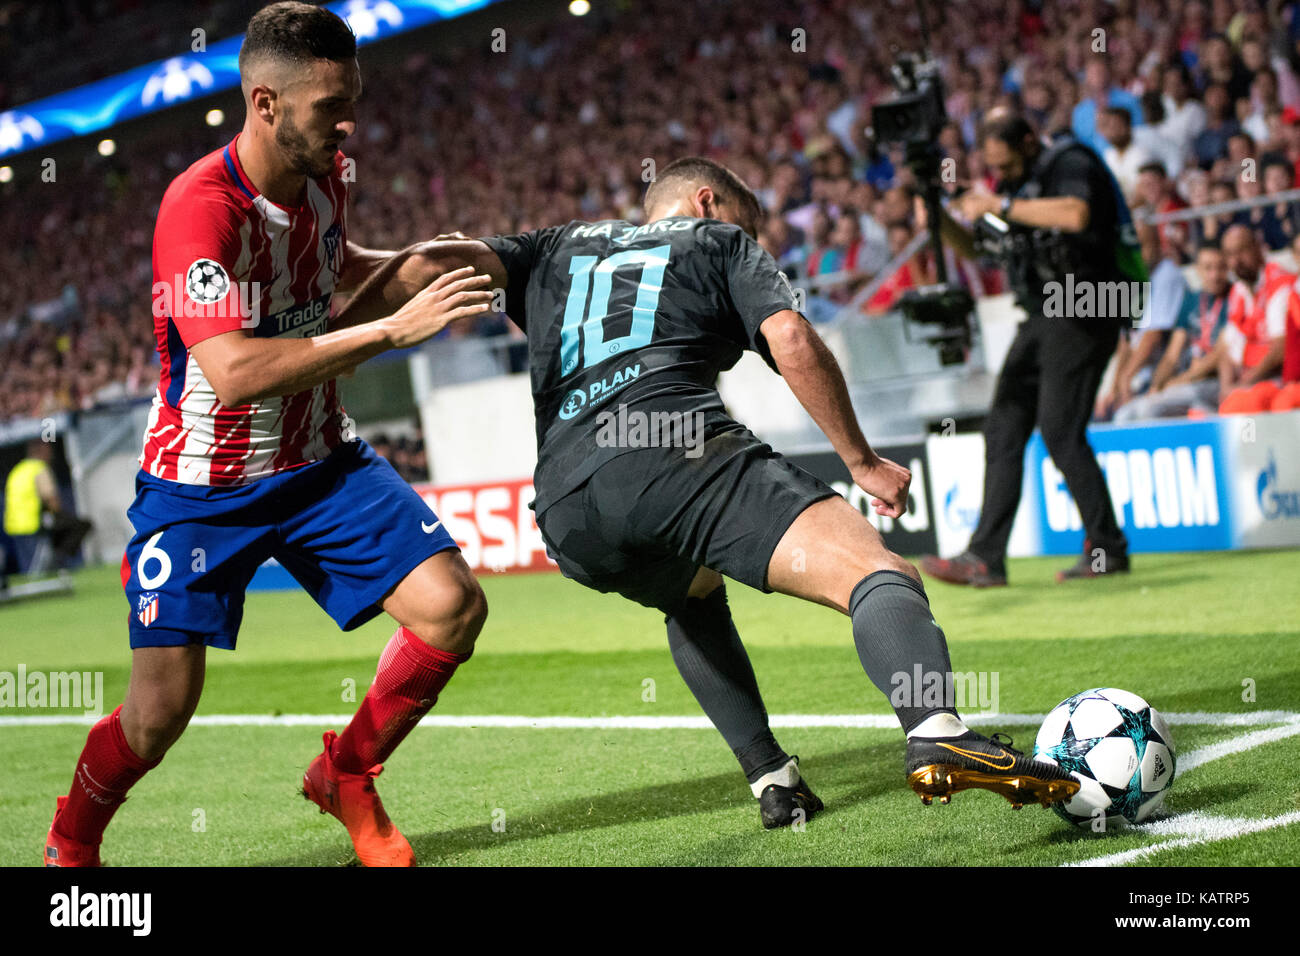 Madrid, Spain. 27th Sep, 2017. Eden Hazard (Mildfierd, Chelsea FC) in action covered by Koke Resurreccion (Mildfierd, Atletico Madrid) during the football match of group stage of 2017/2018 UEFA Europa League between Club Atletico de Madrid and Chelsea Football Club at Wanda Metropolitano Stadium on September 27, 2017 in Madrid, Spain. Credit: David Gato/Alamy Live News Stock Photo